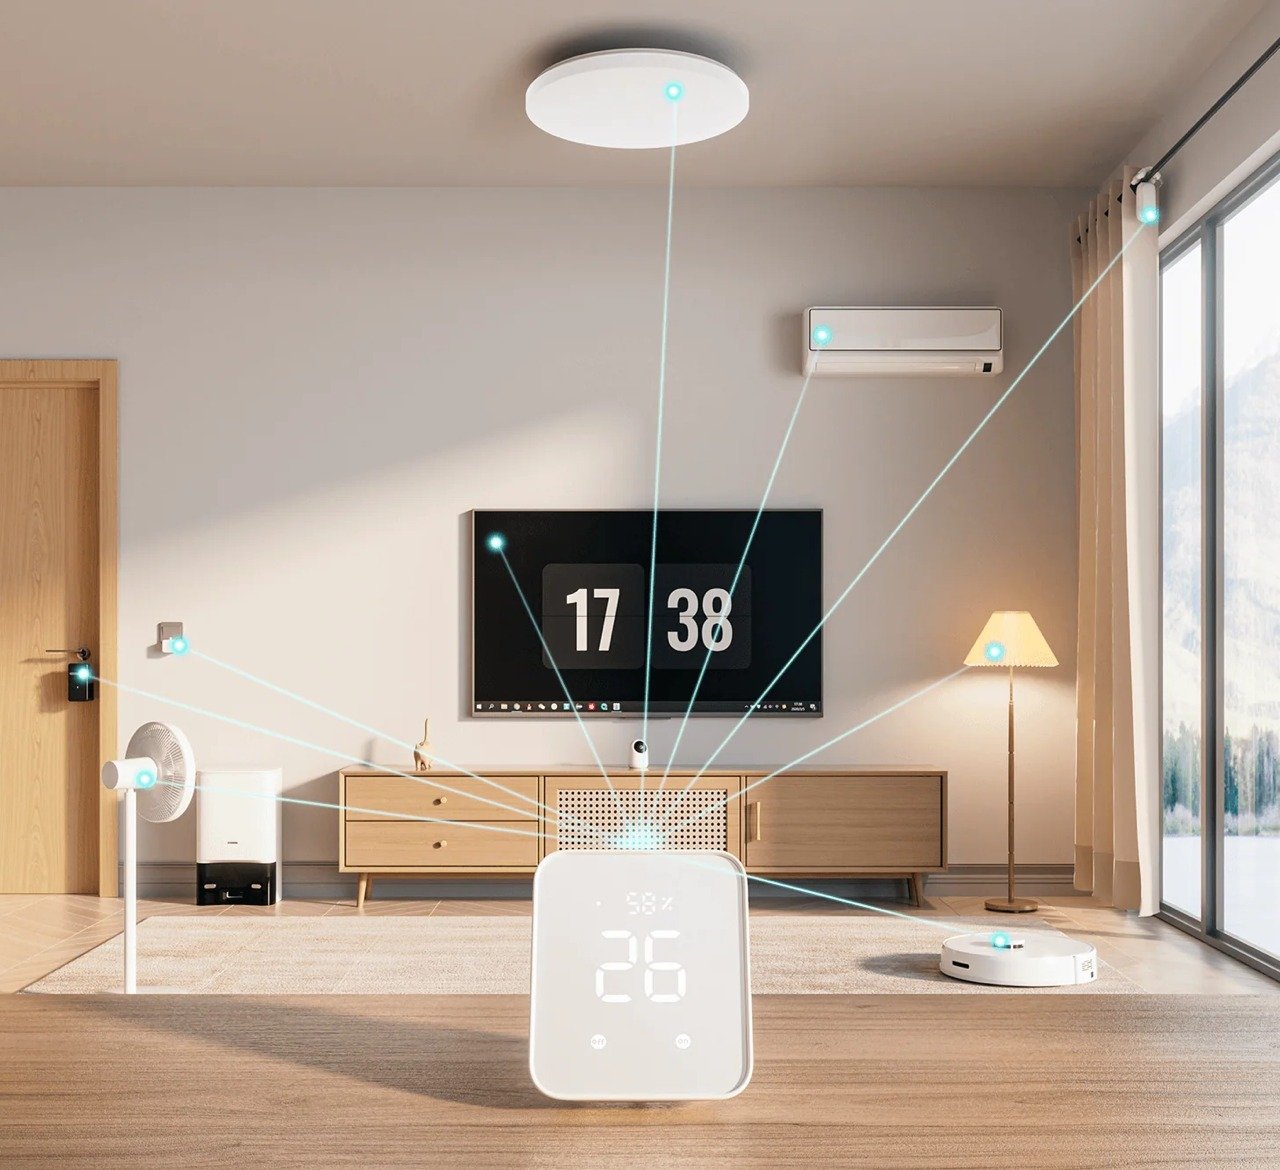 SwitchBot debuts Matter-enabled Hub 2 with thermometer at CES